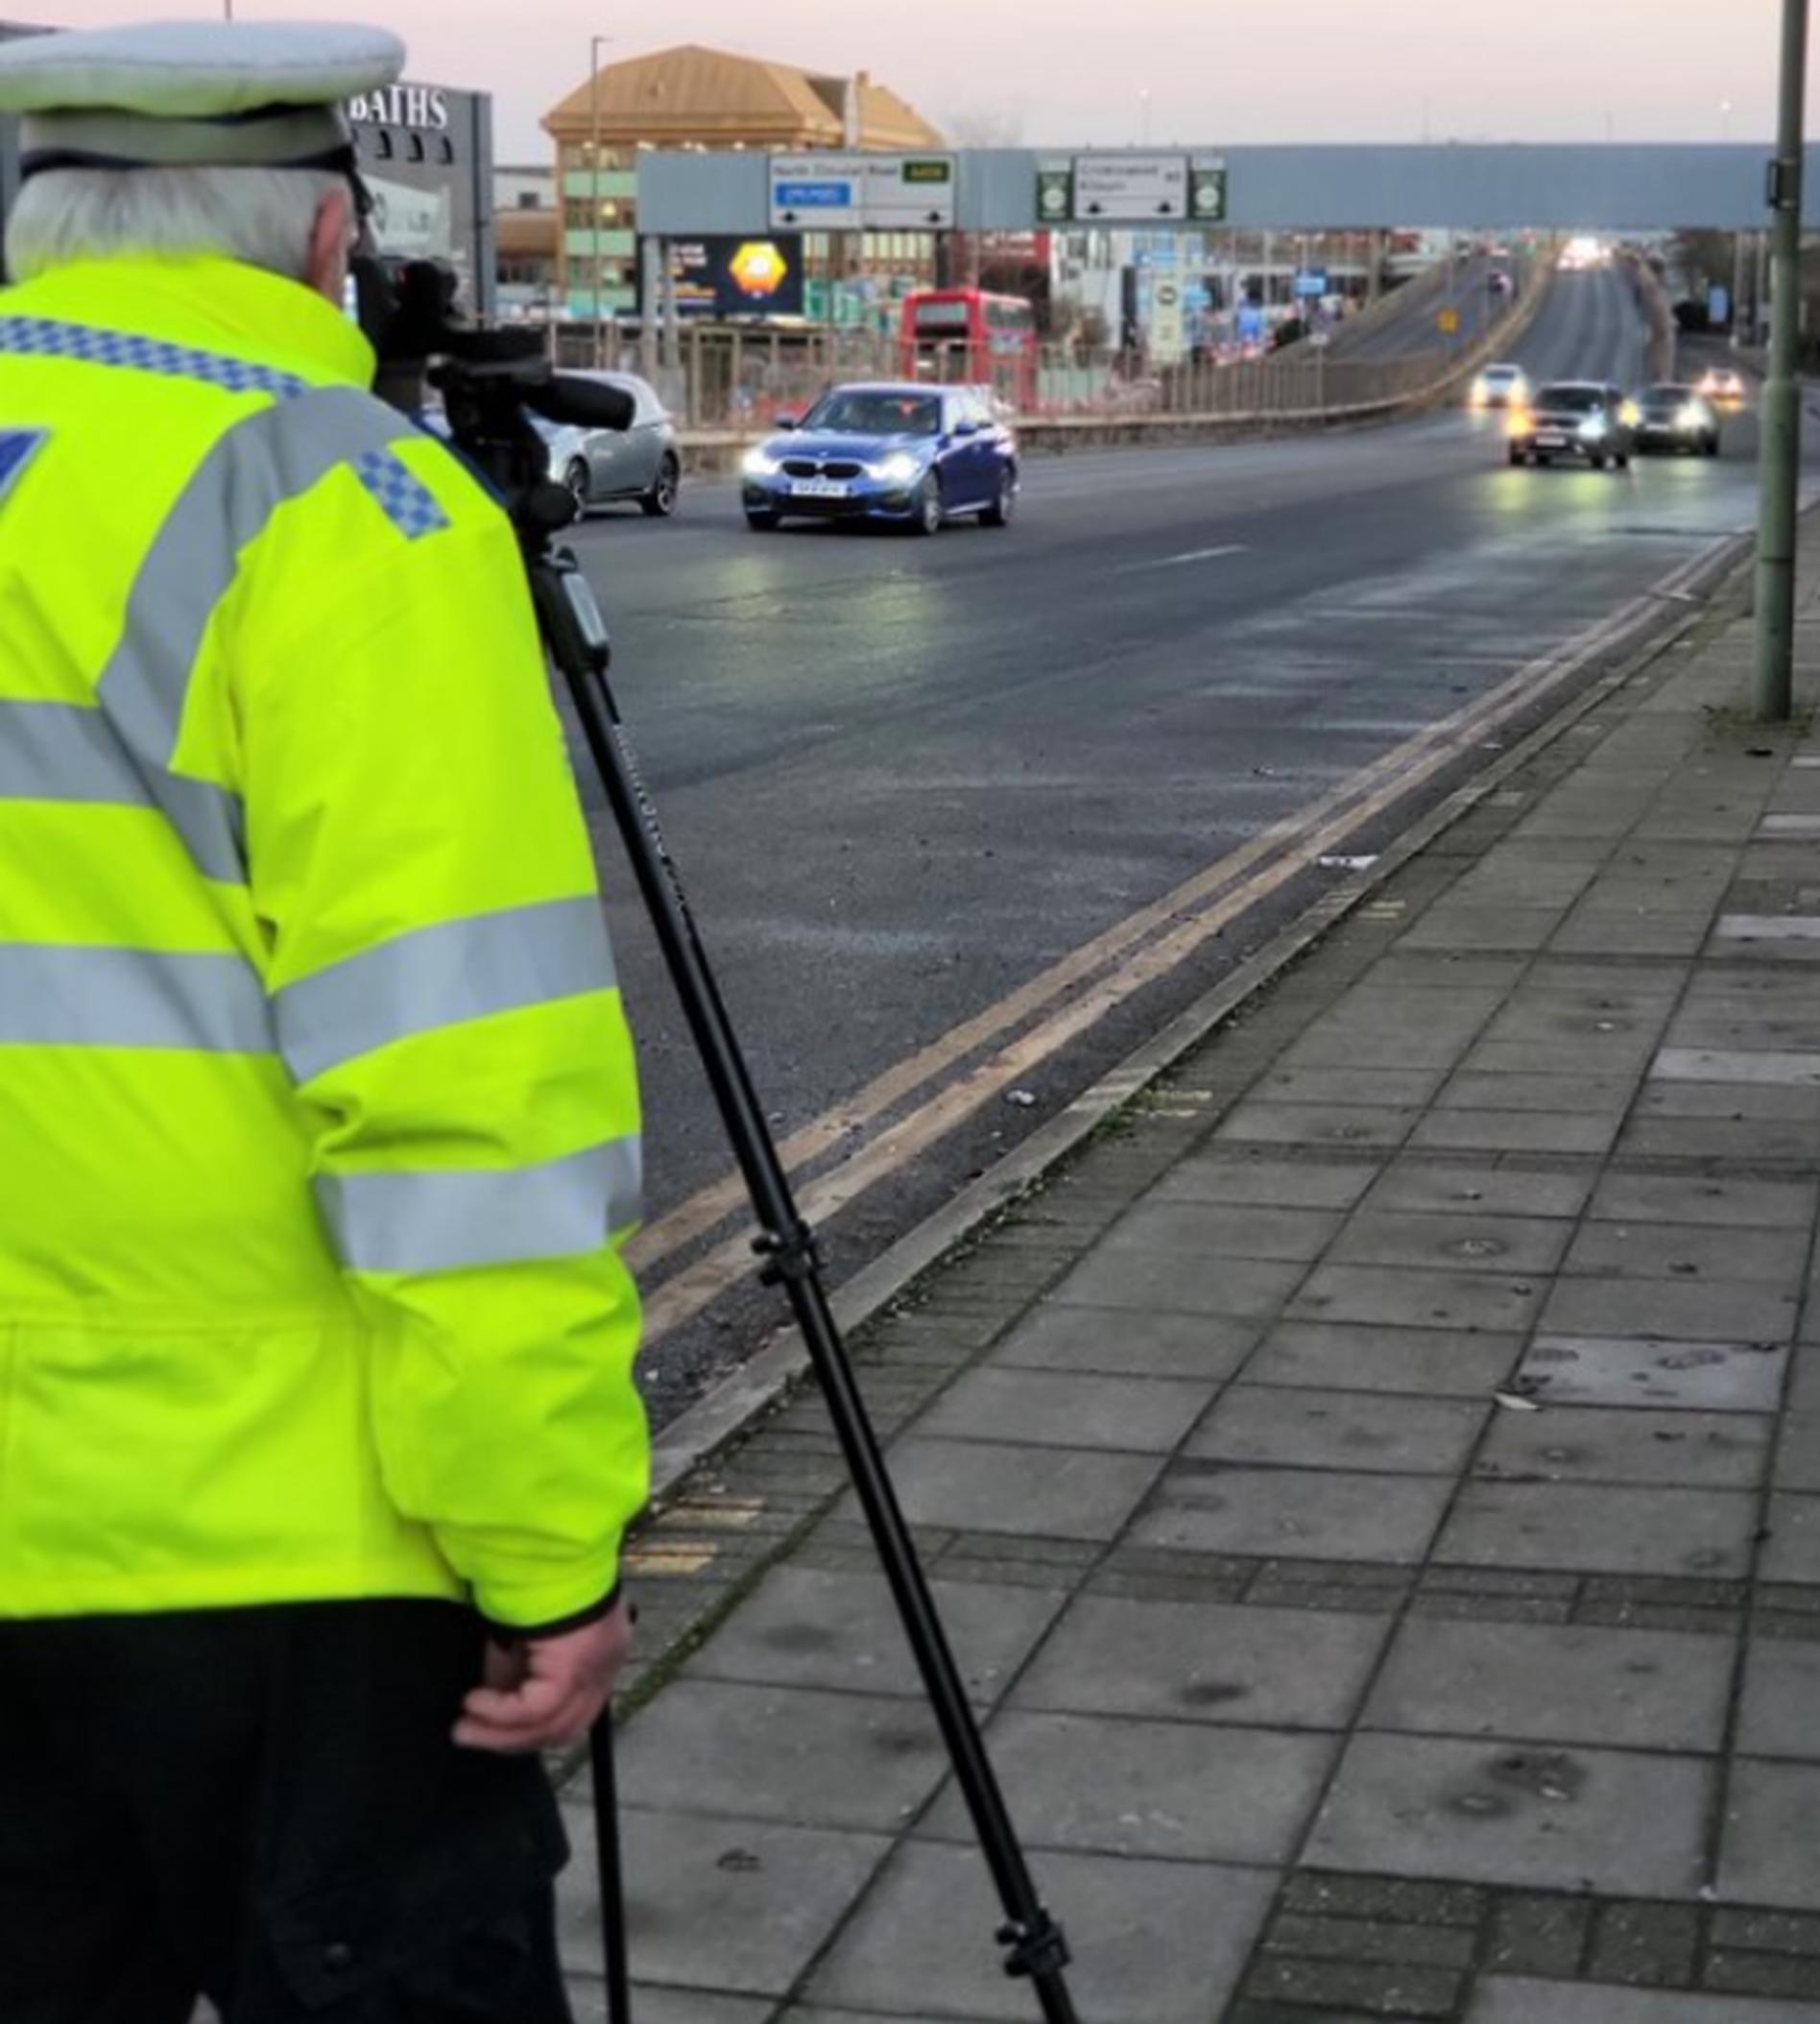 PCSOs will operate the mobile laser cameras